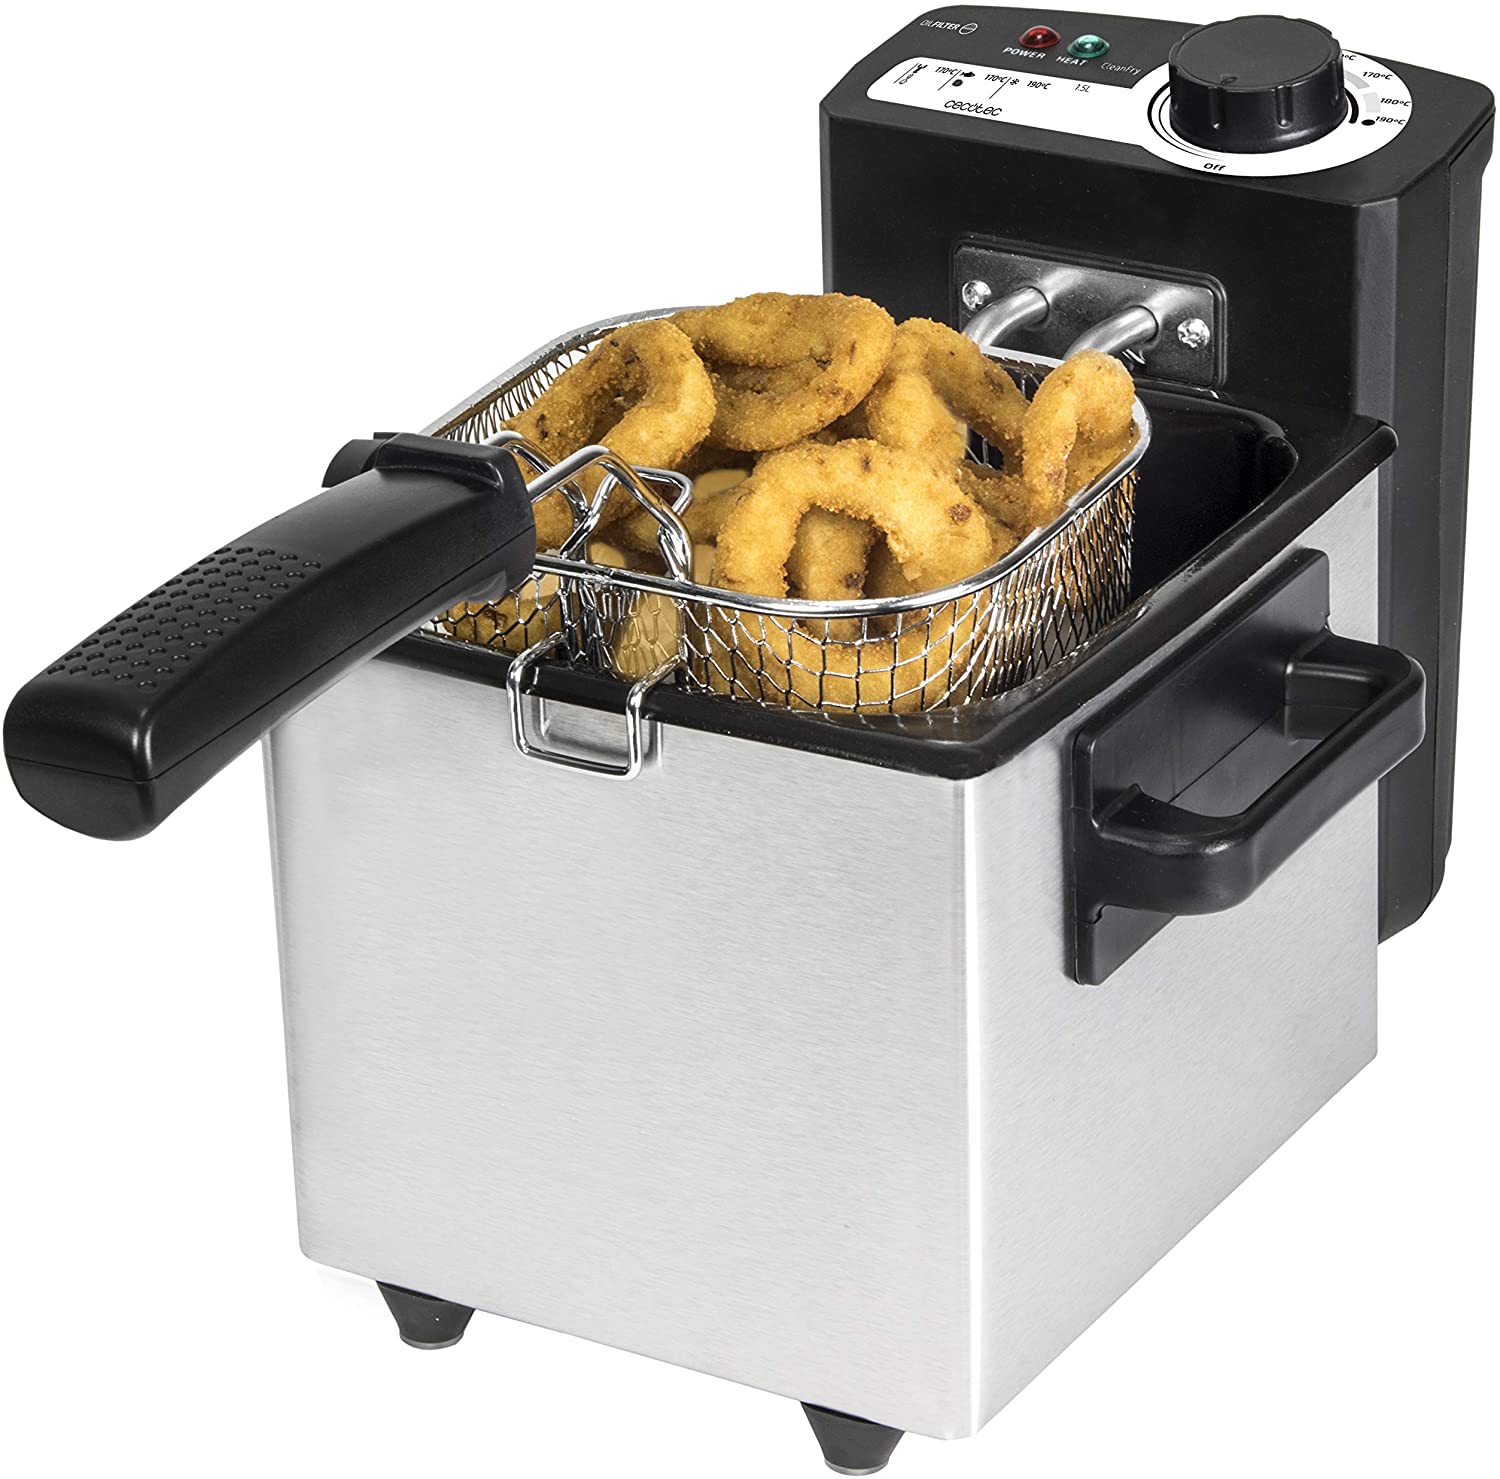 Cecotec CleanFry Deep Fryer 1.5 - 3 L, Temperature up to 190 ªC, Tub is Dishwasher Safe, Filter OilCleaner. (1.5 L, Grey)